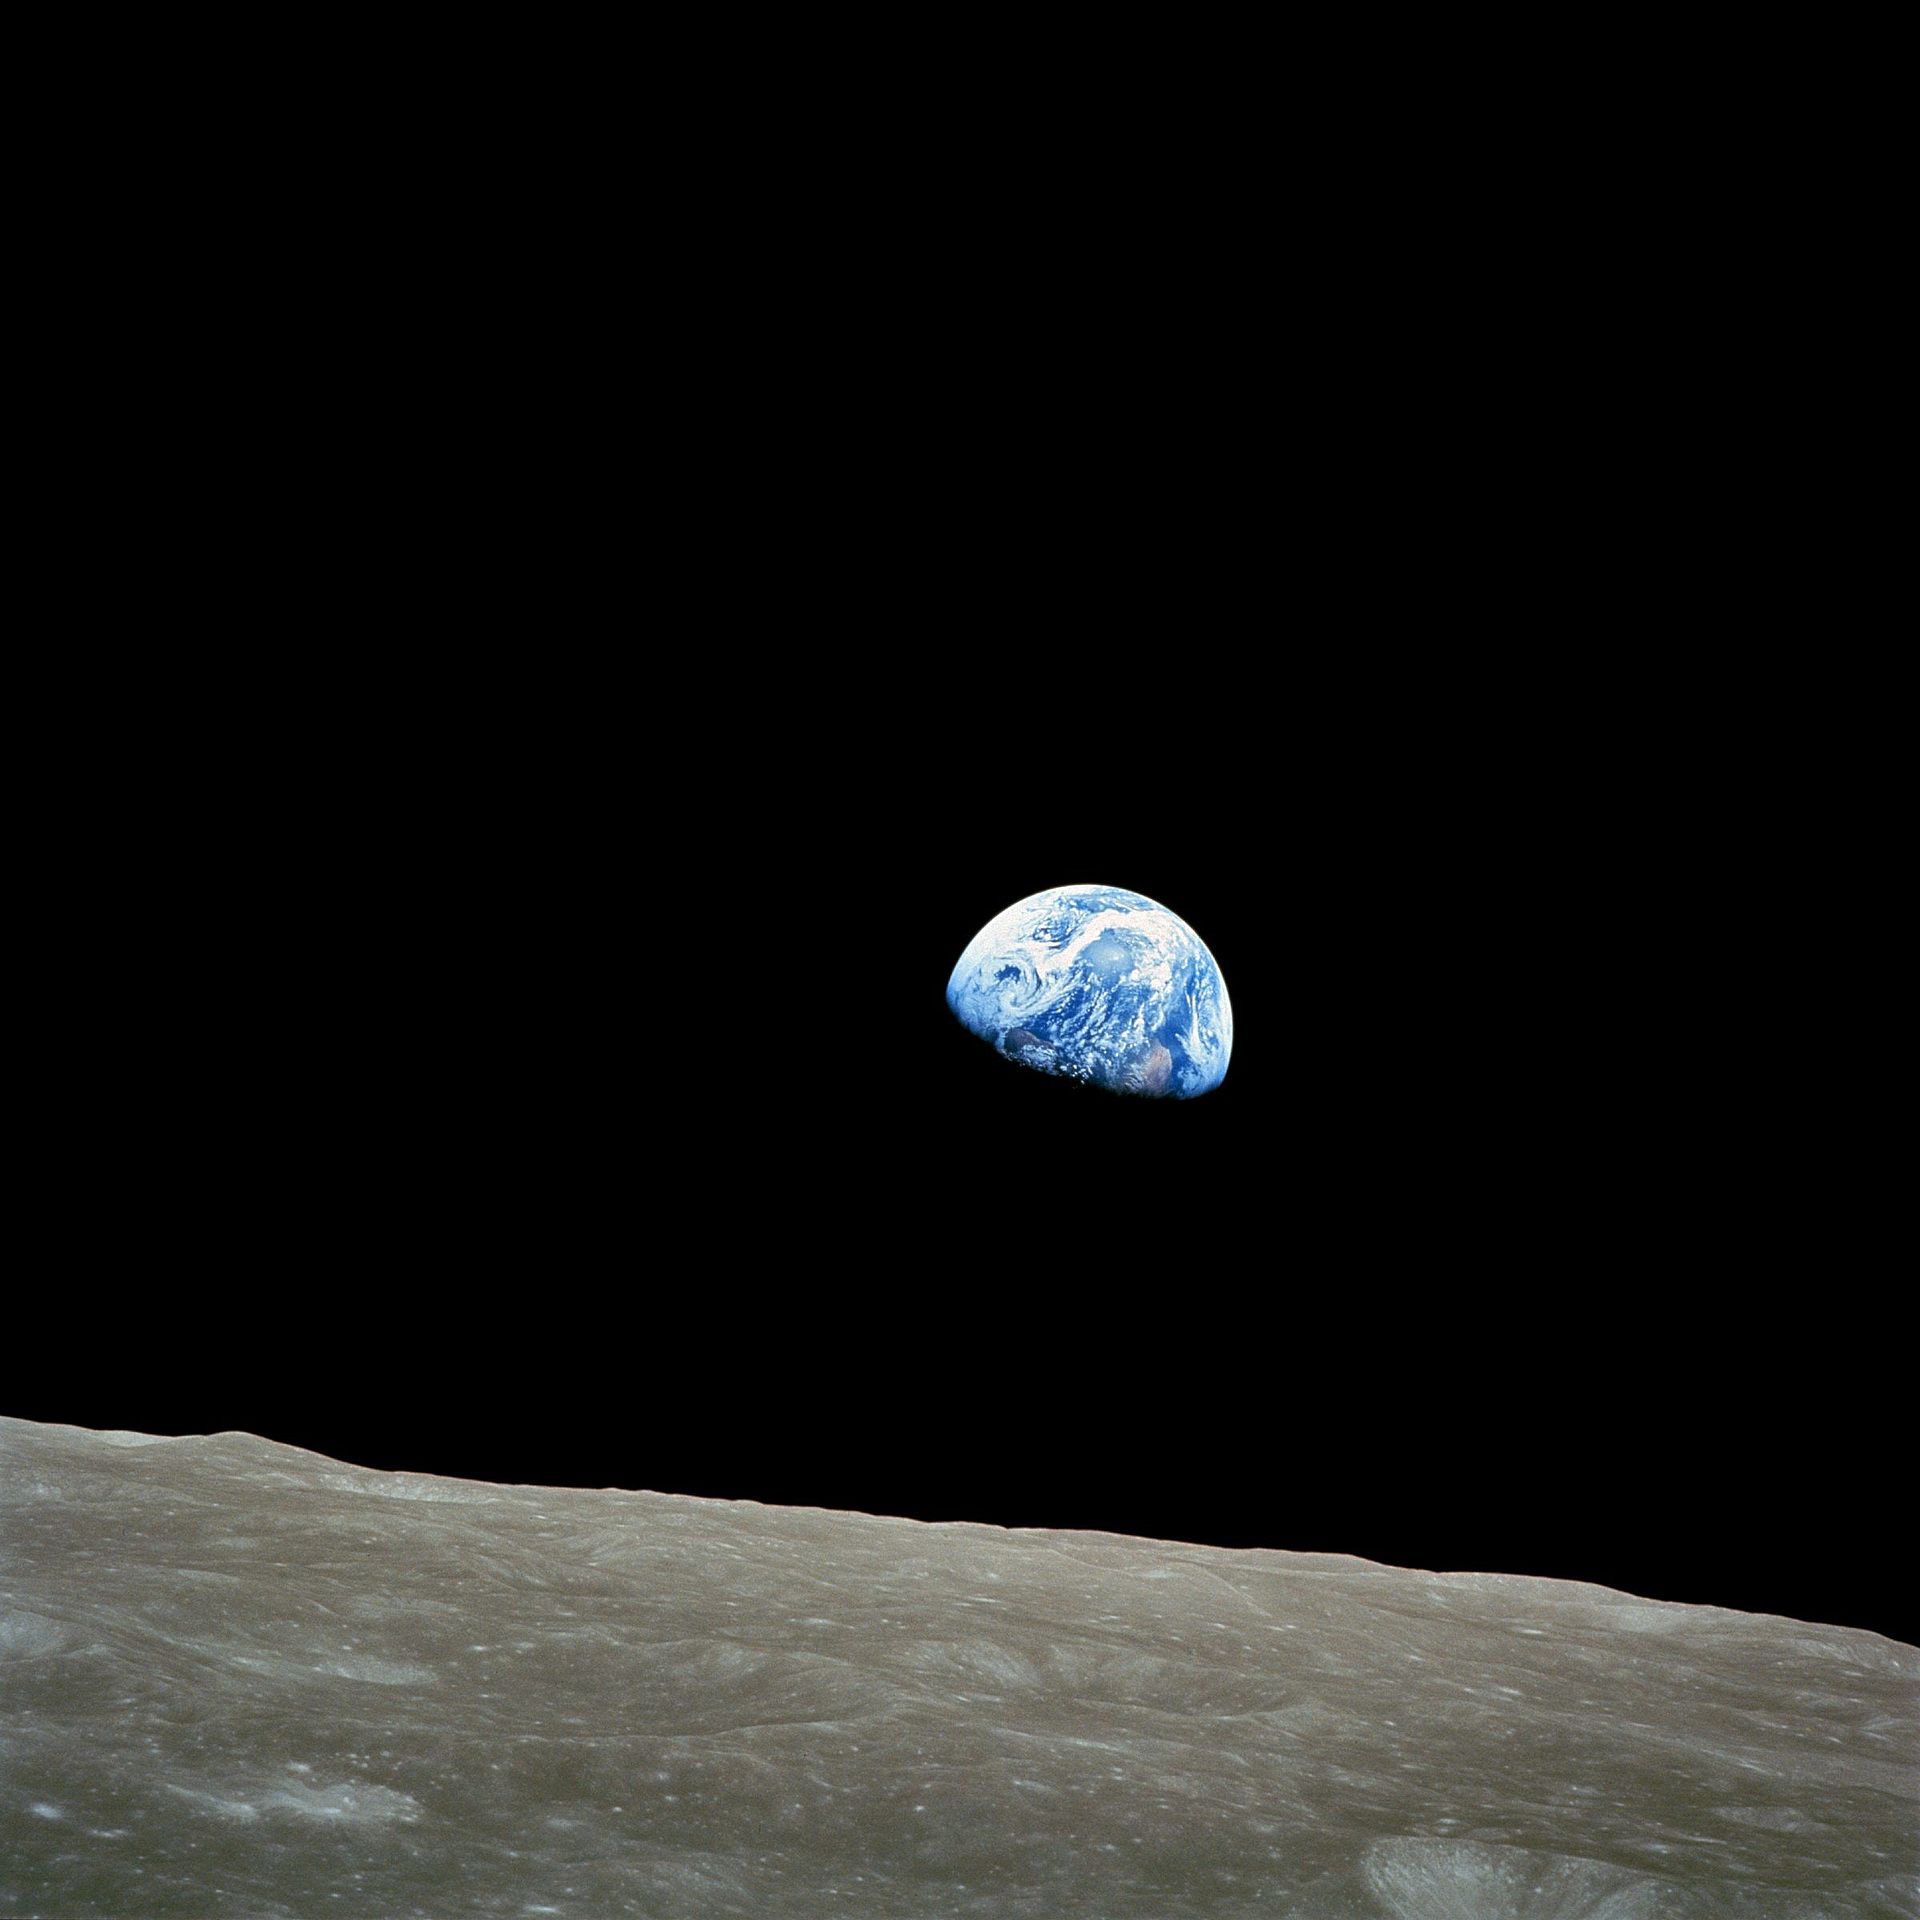 It is only when we view our planet from space that we realize how valuable the earth is.